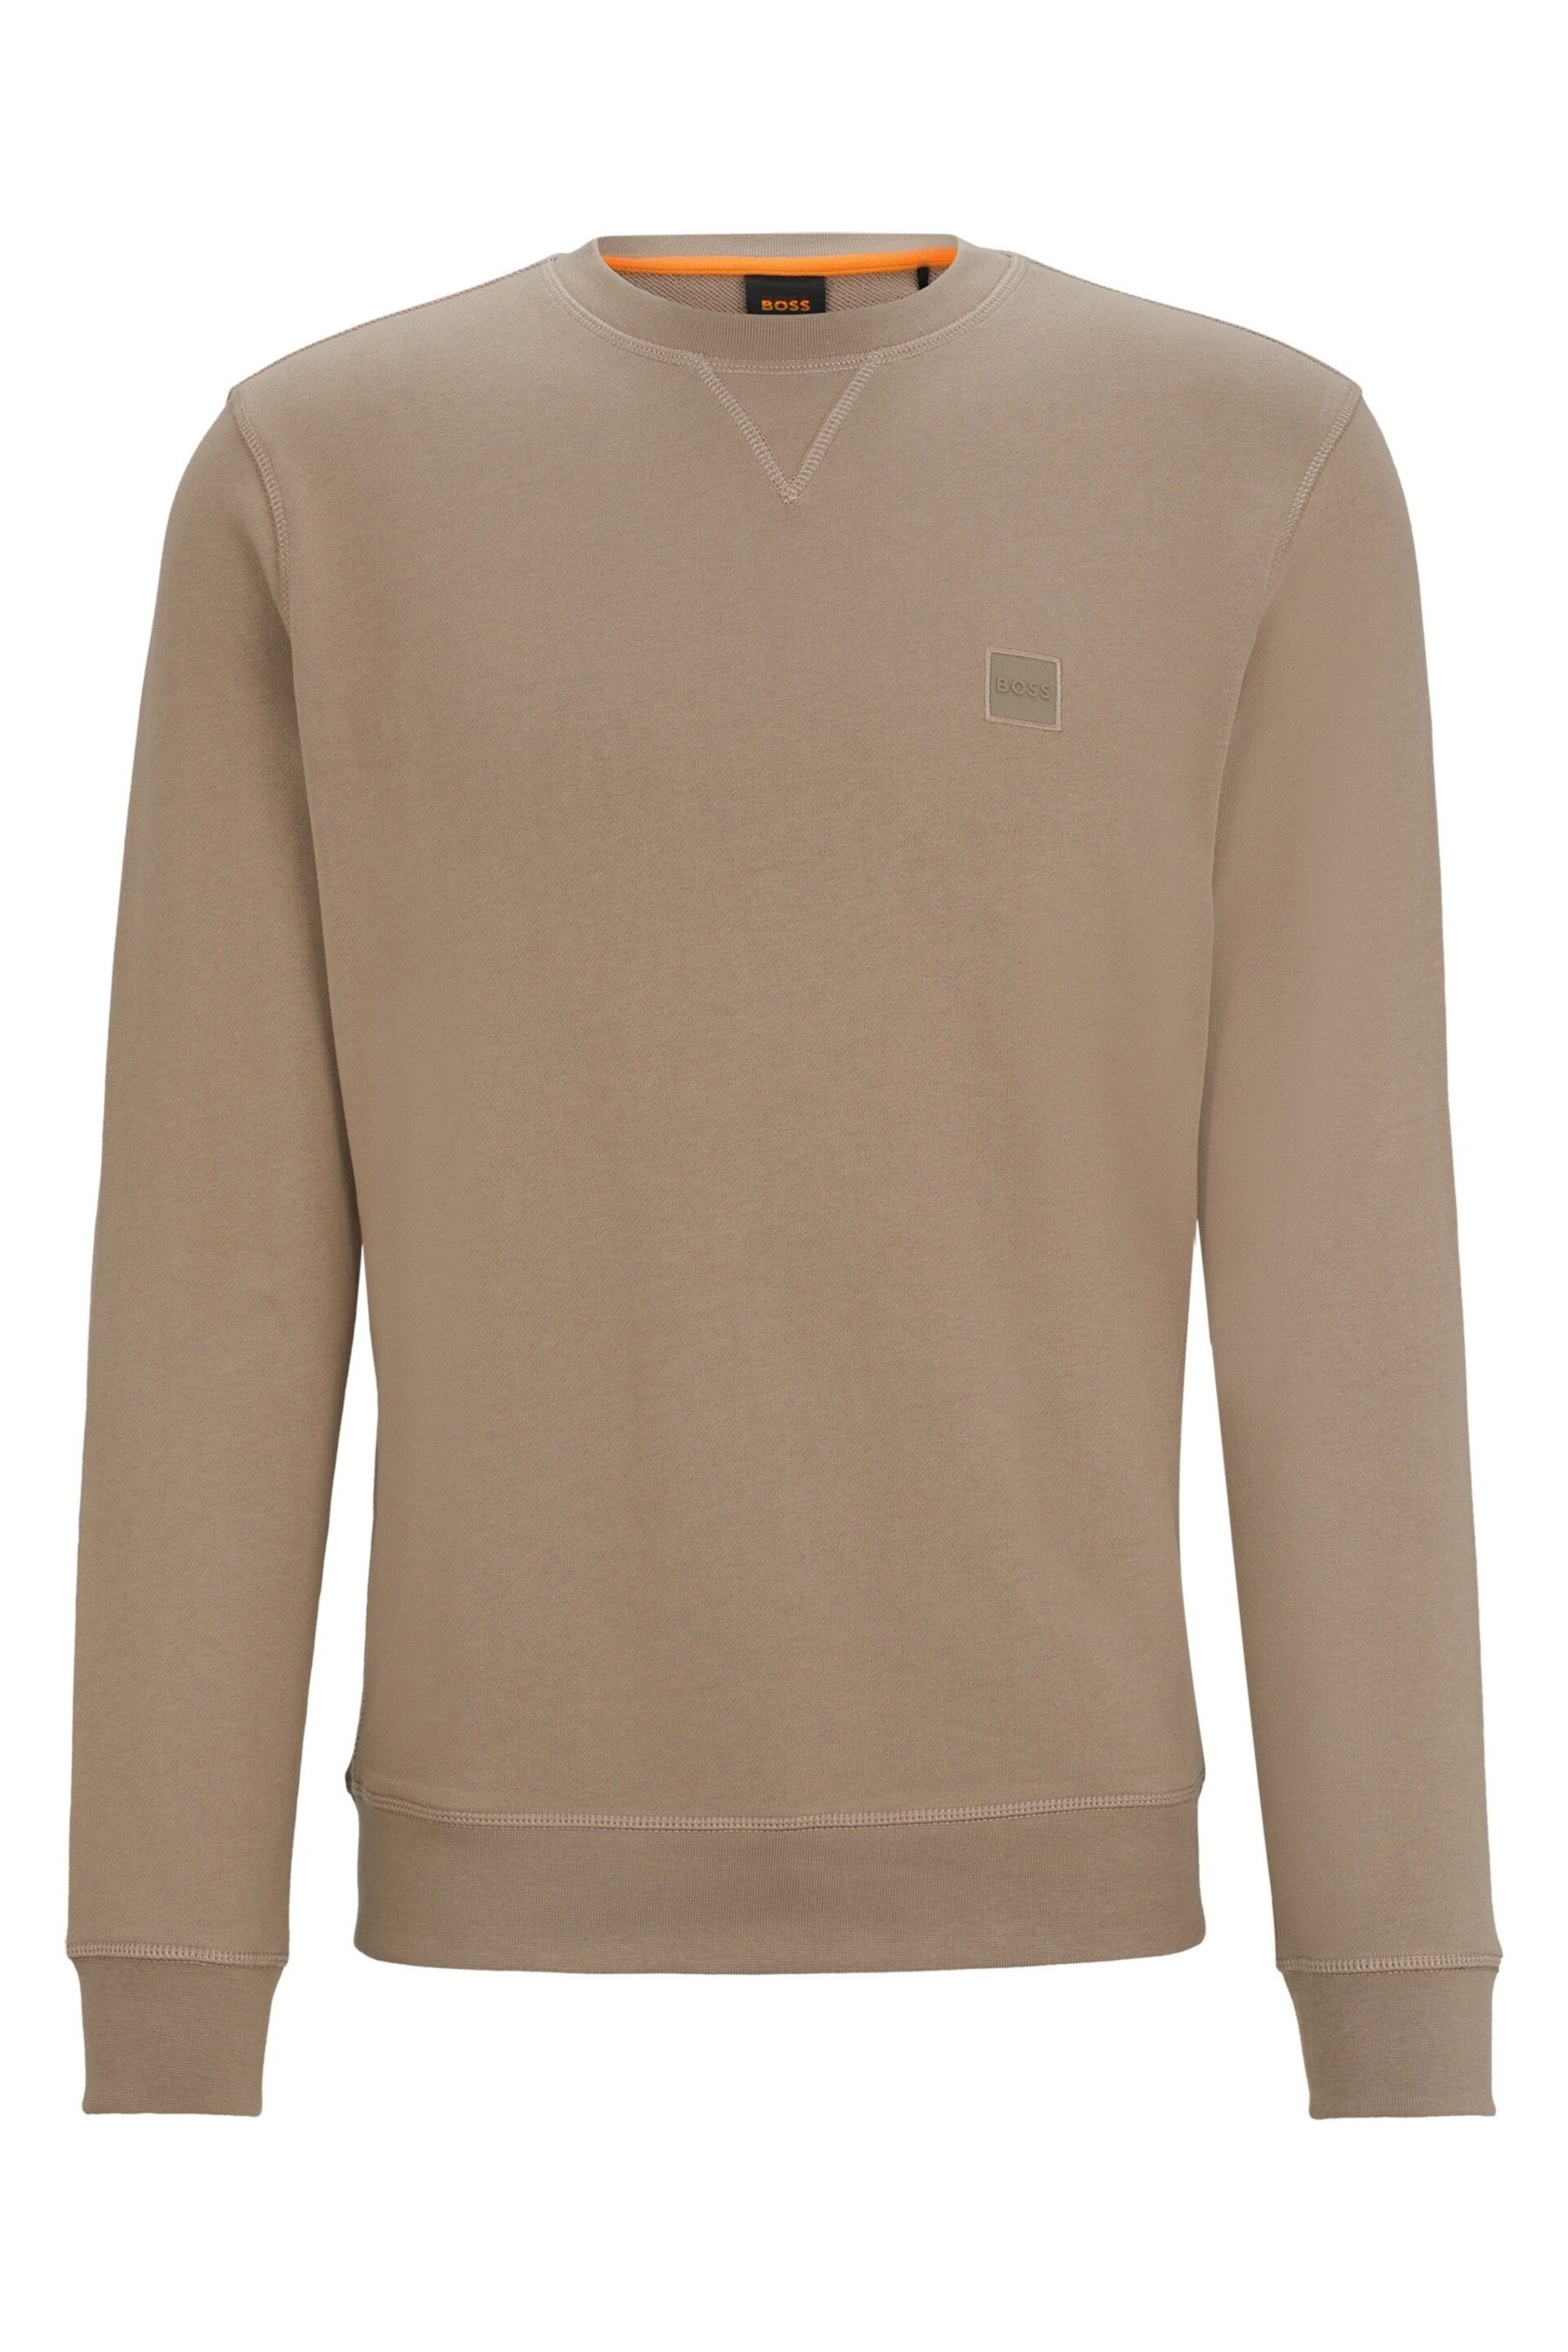 BOSS Brown Cotton Terry Relaxed Fit Sweatshirt - Image 5 of 5